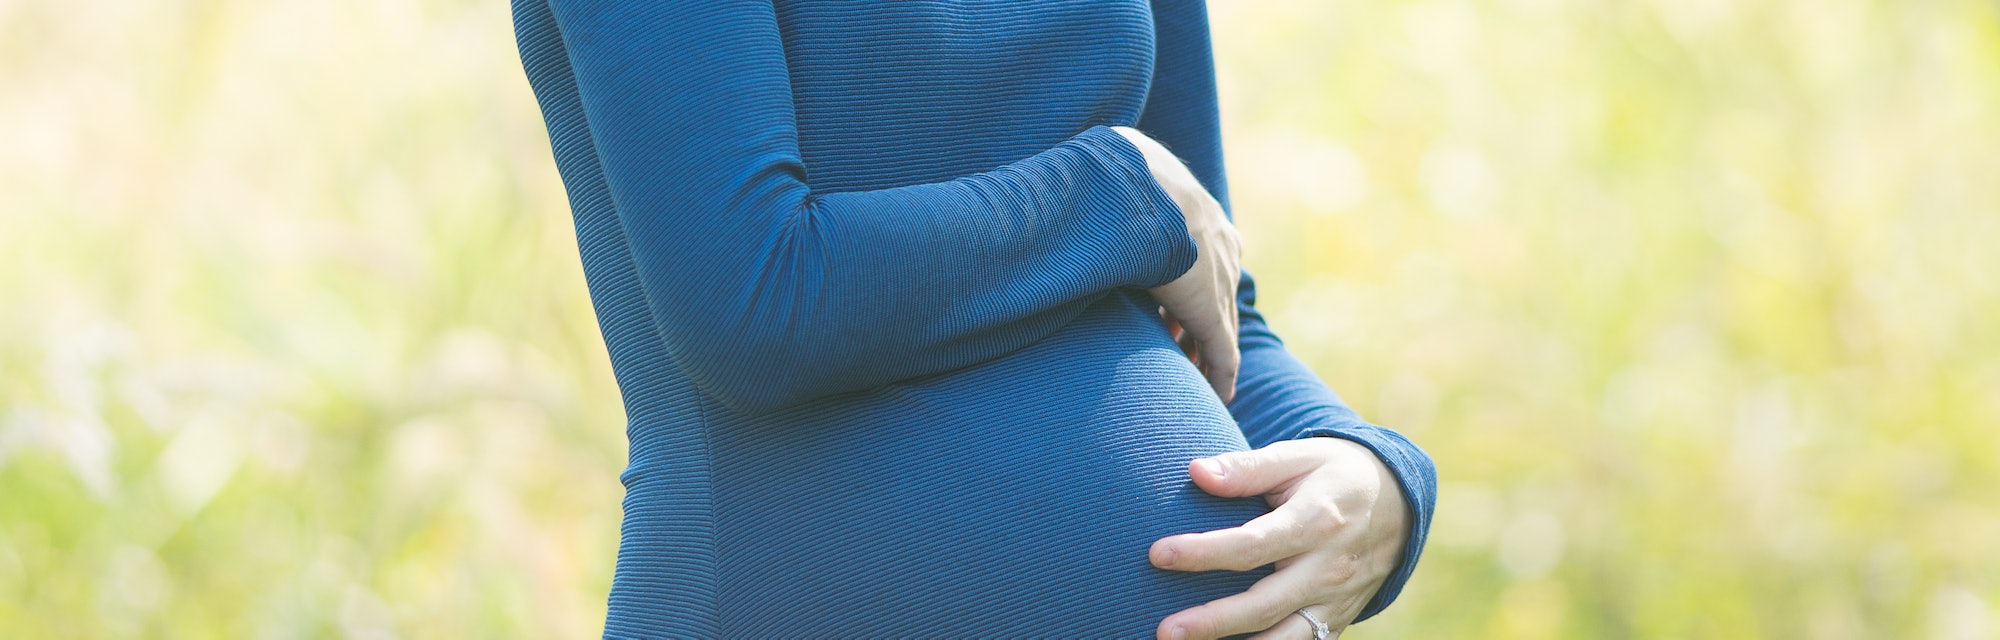 A pregnant woman with dark hair wearing a blue dress, smiling and cradling her belly, in an article ...